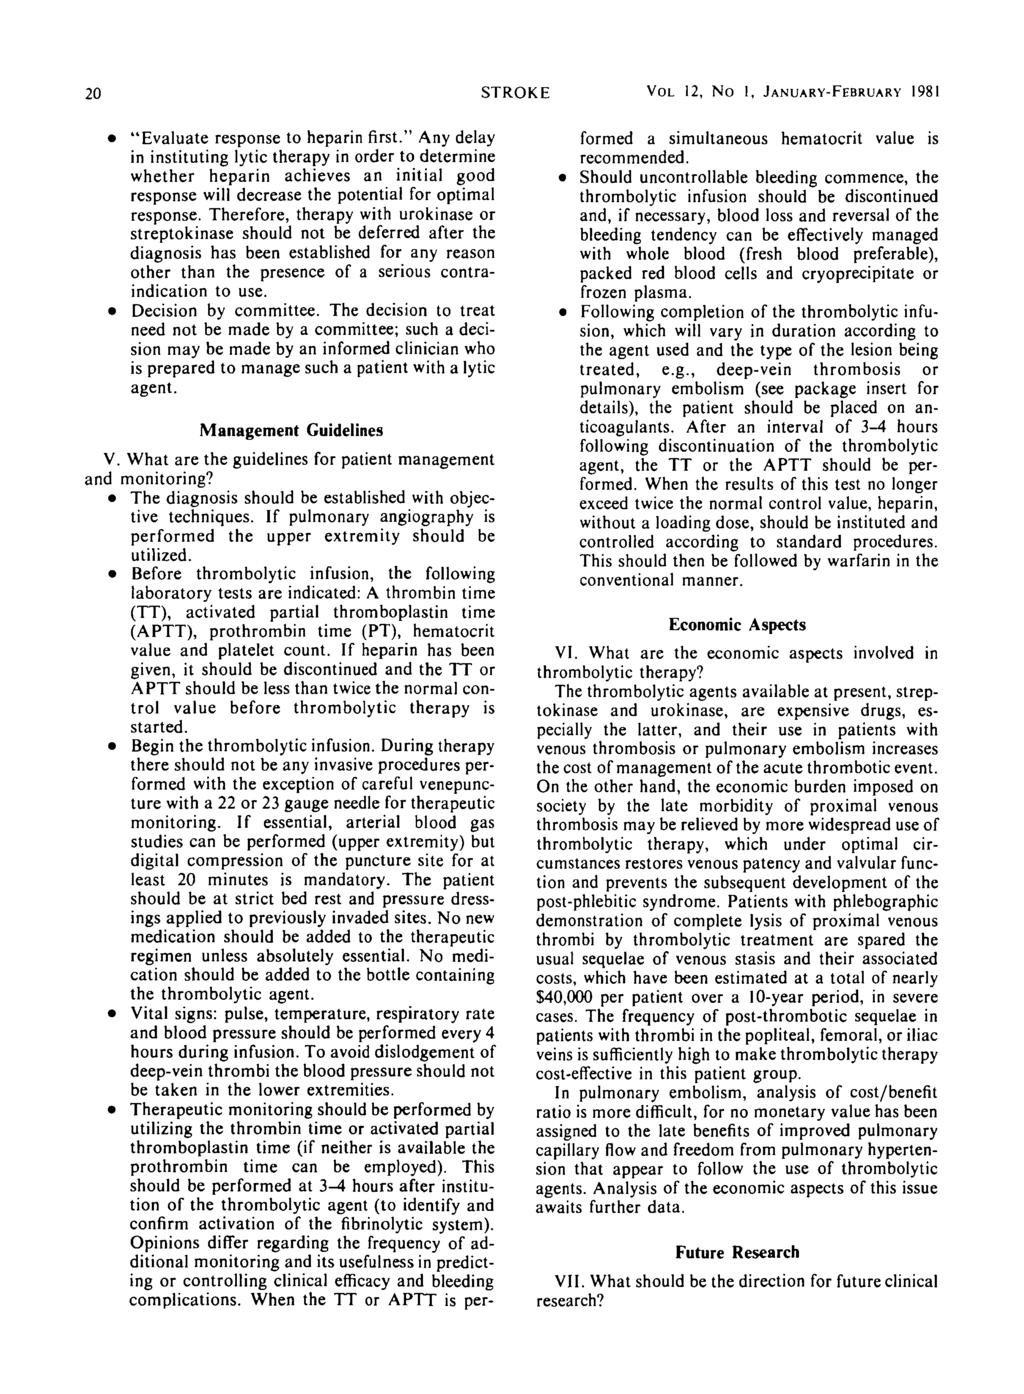 20 STROKE VOL 12, No 1, JANUARY-FEBRUARY 1981 "Evaluate response to heparin first.